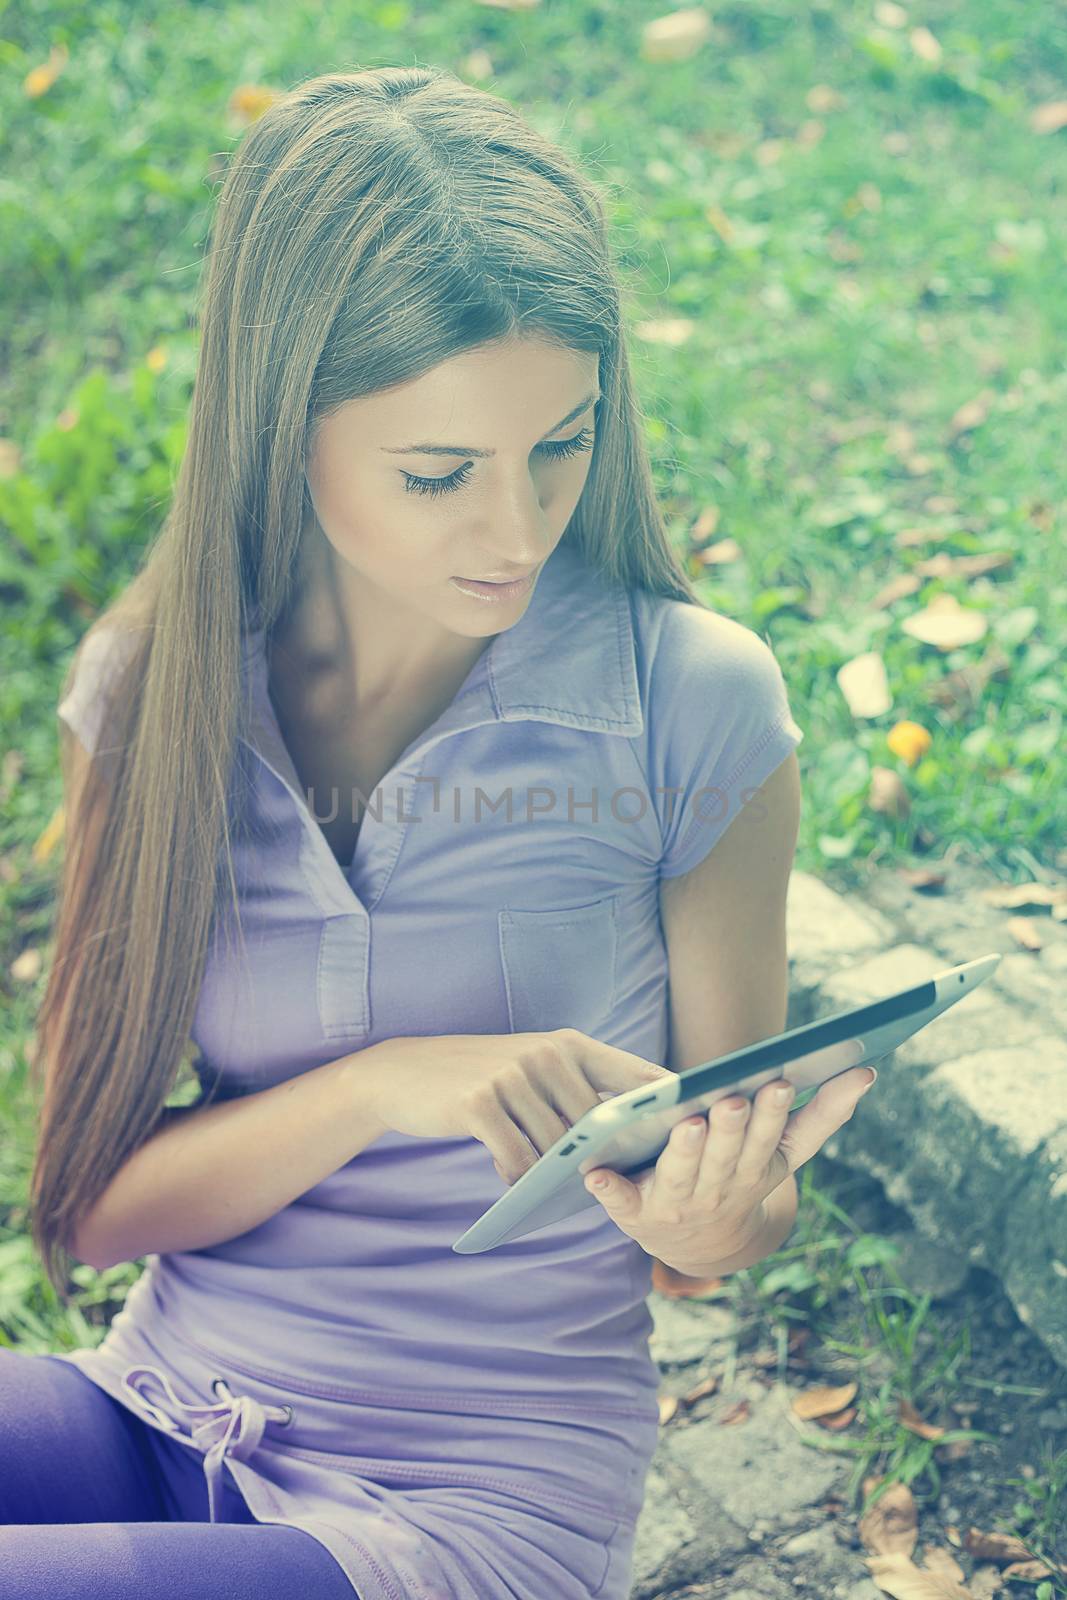 Beautiful Woman With Tablet Computer In Park by adamr